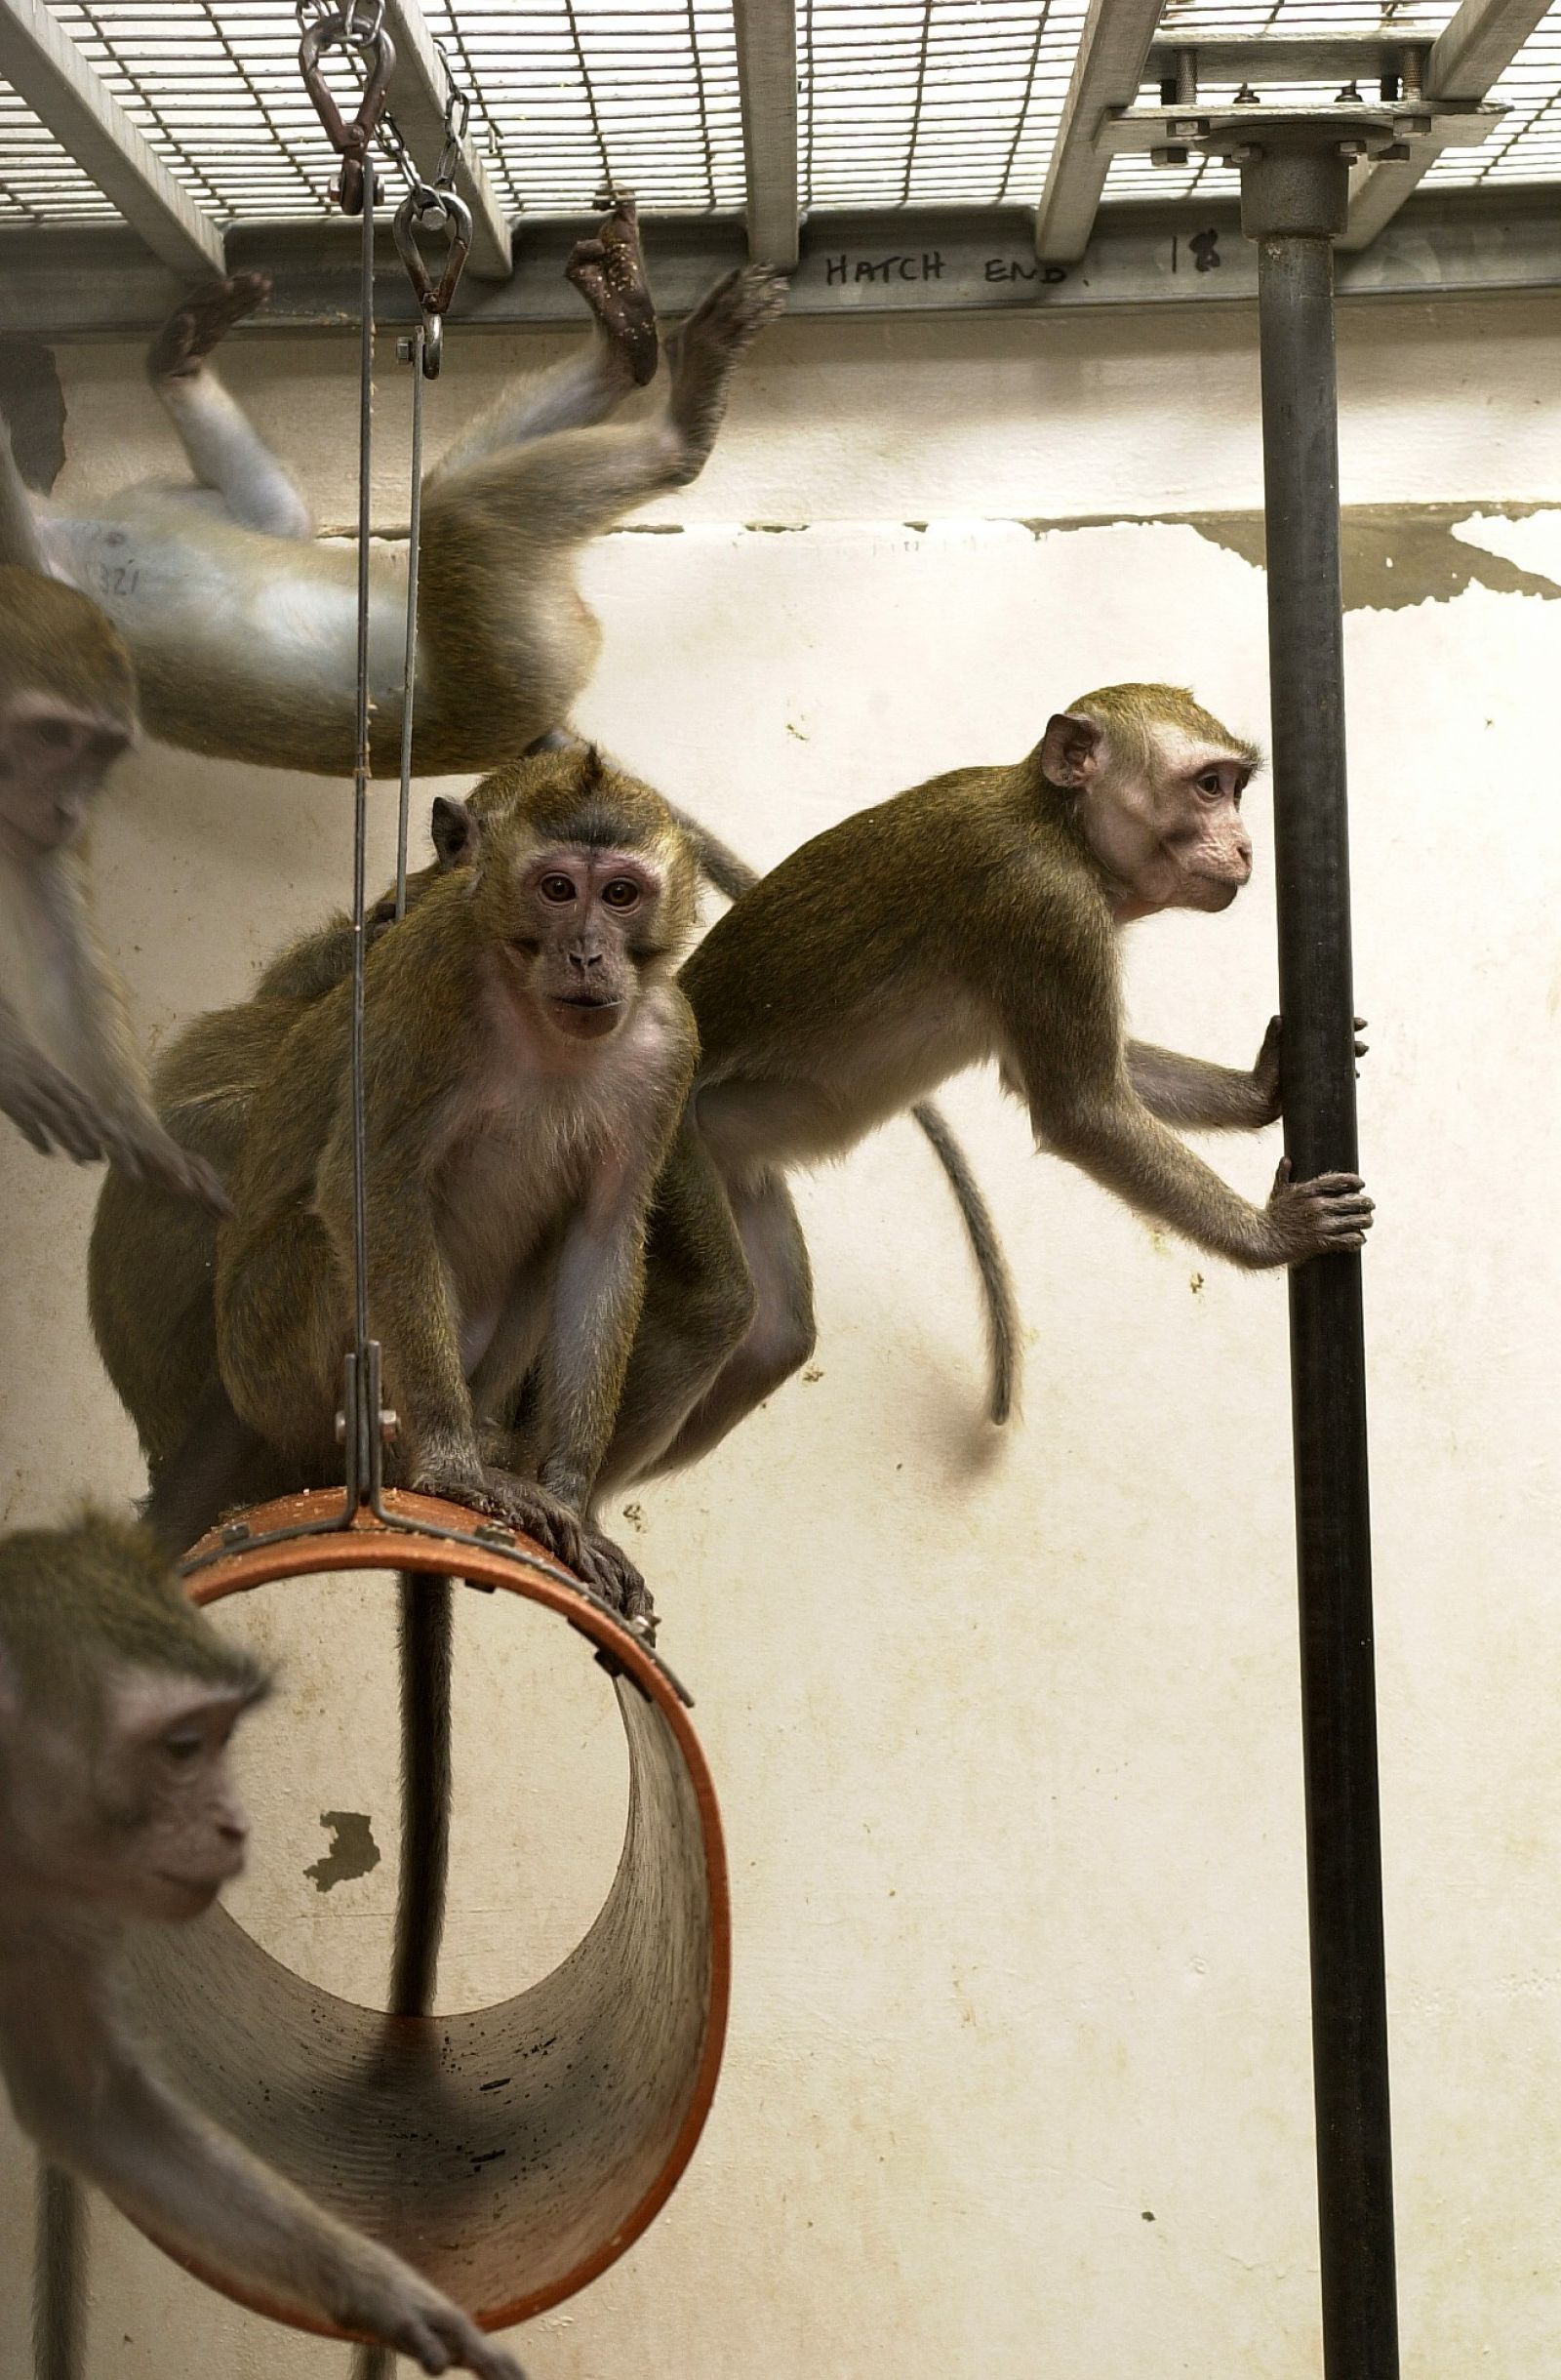 Macaques climb in cage